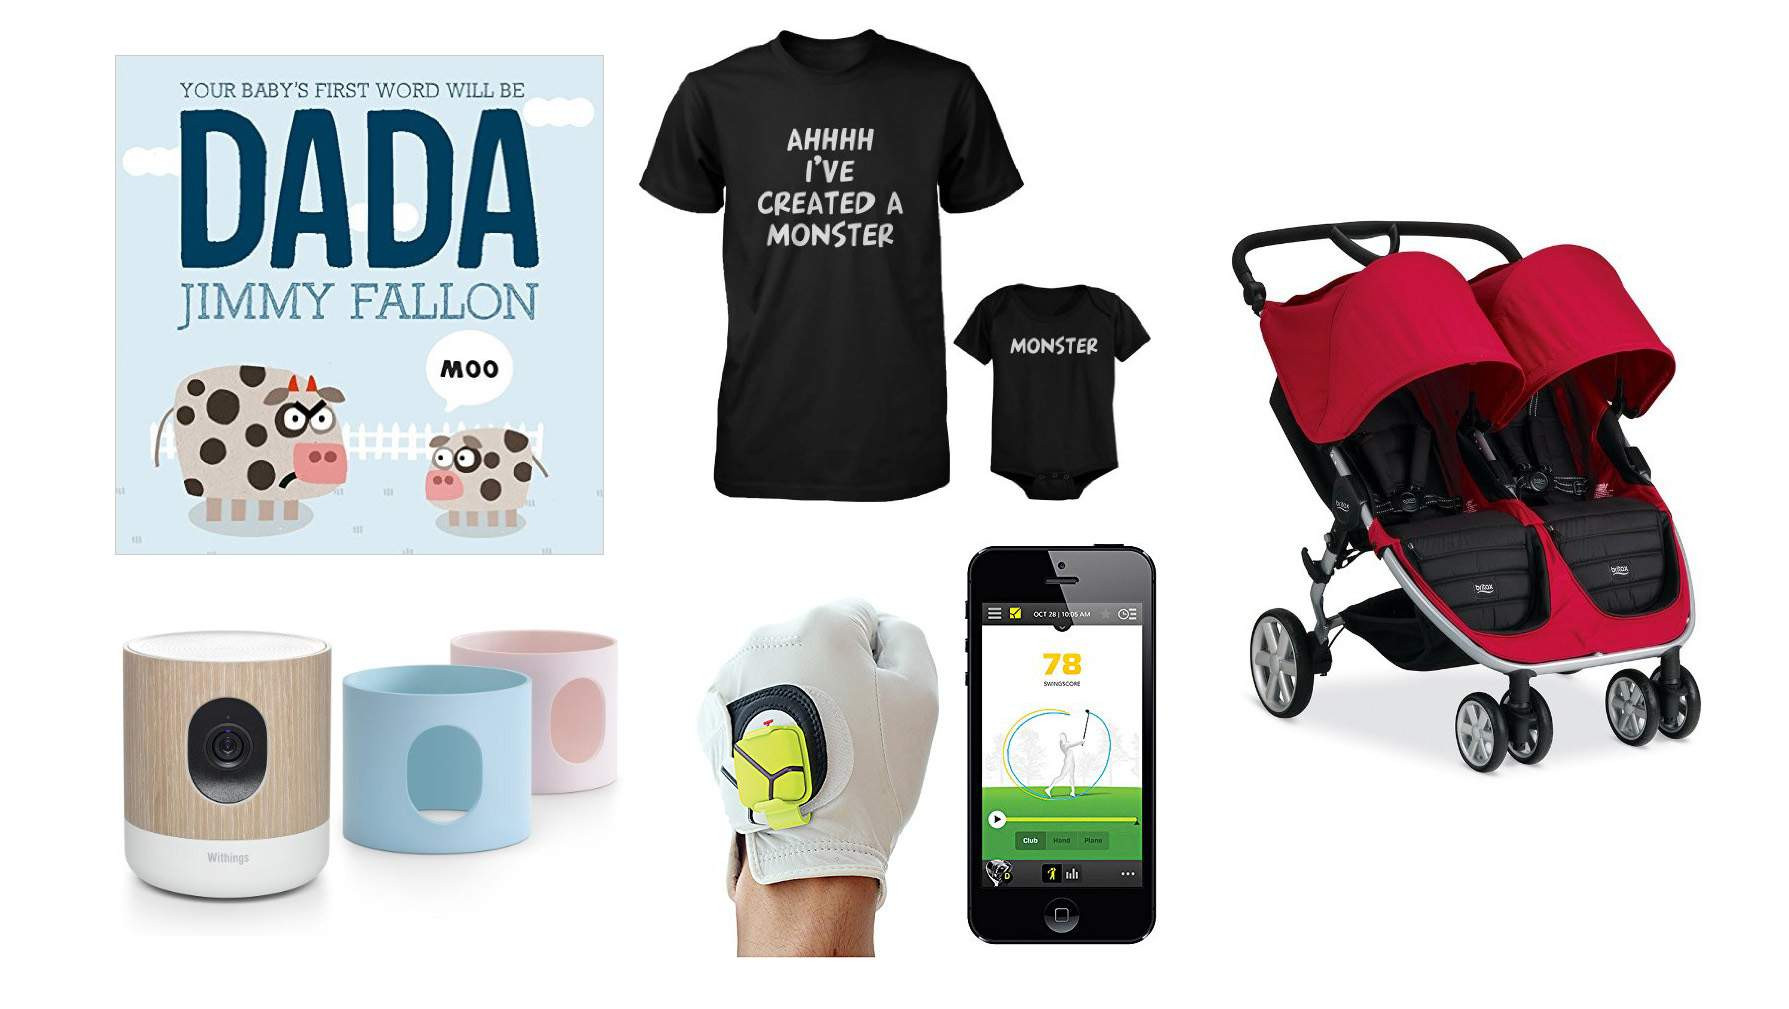 New Father Gift Ideas
 Top 10 Best Father’s Day Gifts for New Dads